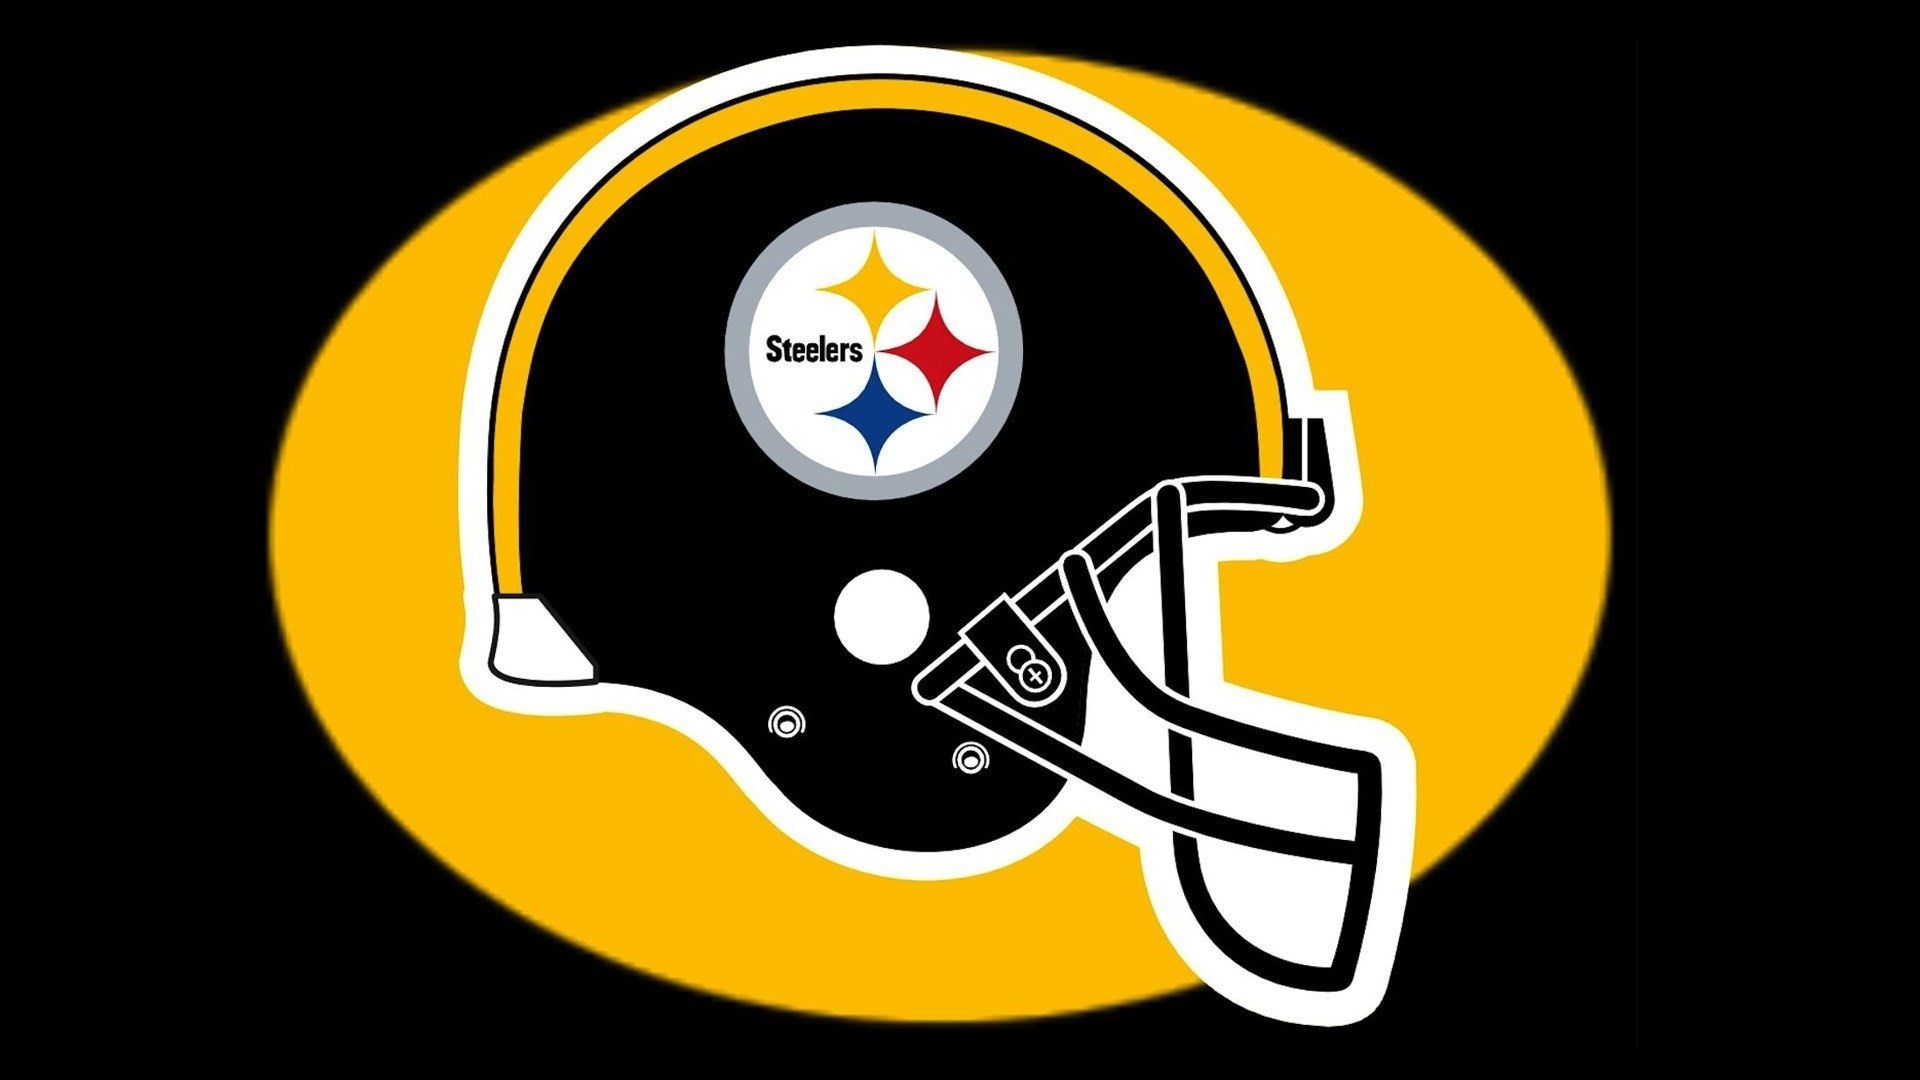 Wallpapers HD Pitt Steelers with resolution 1920x1080 pixel. You can make this wallpaper for your Mac or Windows Desktop Background, iPhone, Android or Tablet and another Smartphone device